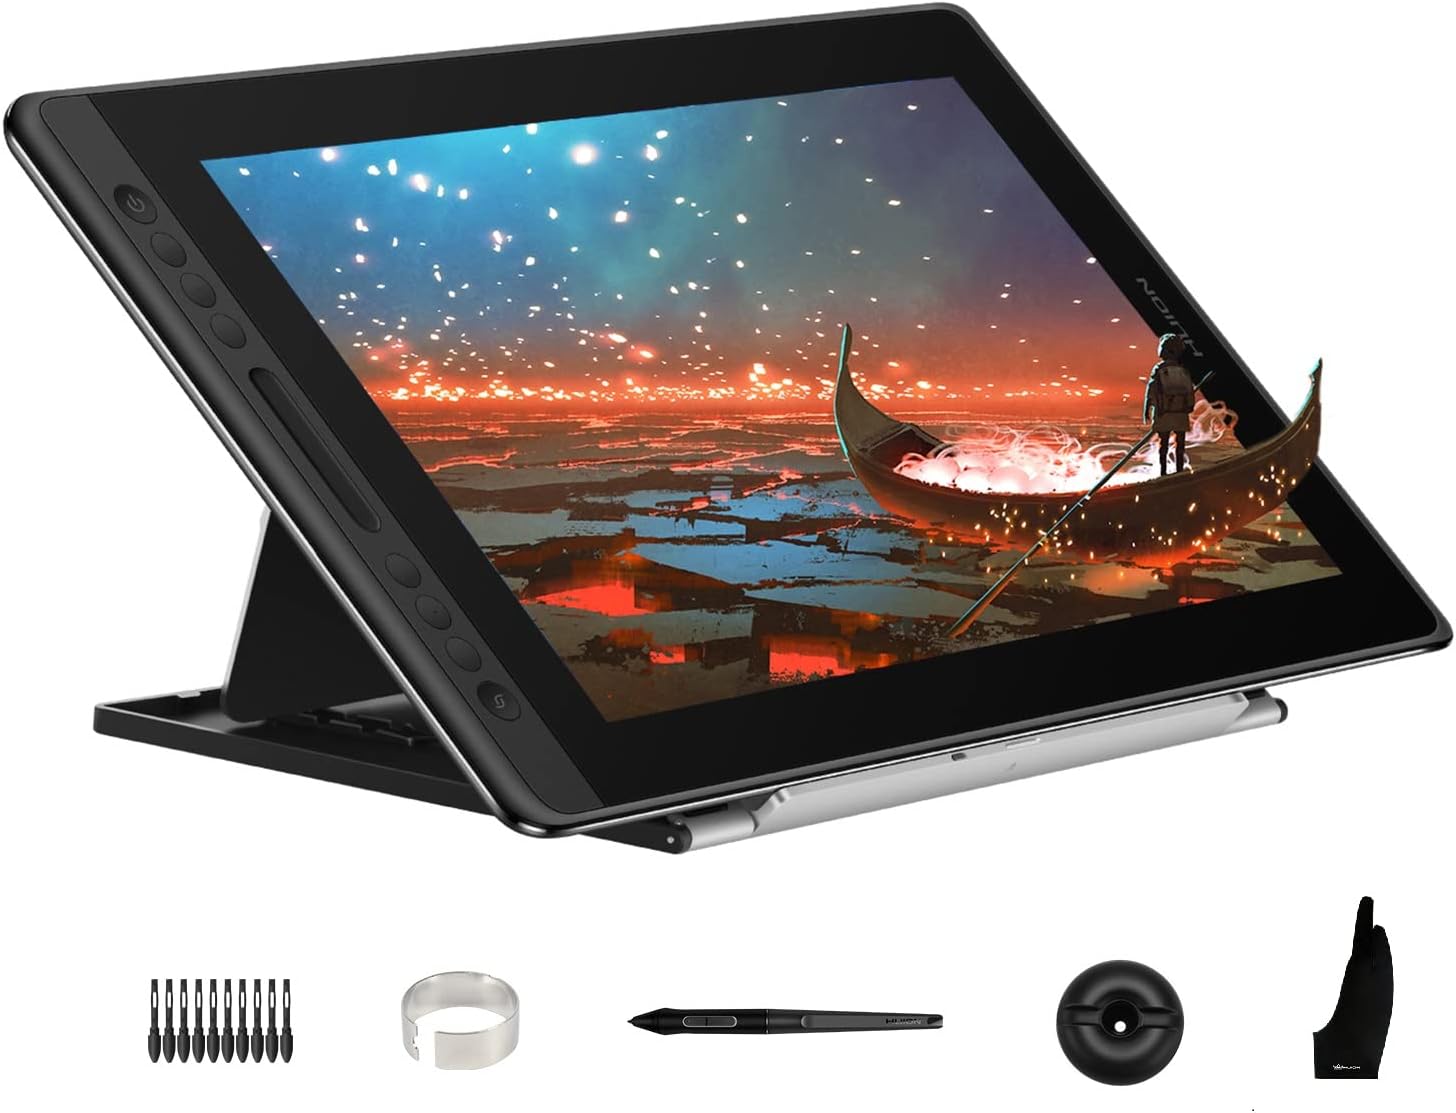 HUION KAMVAS Pro 16 Drawing Tablet with Screen, 15.6 inch Pen Display Anti-Glare Glass 6 Shortcut Keys Adjustable Stand, Graphics Tablet for Drawing, Writing, Design, Work with Windows, Mac and Linux 2